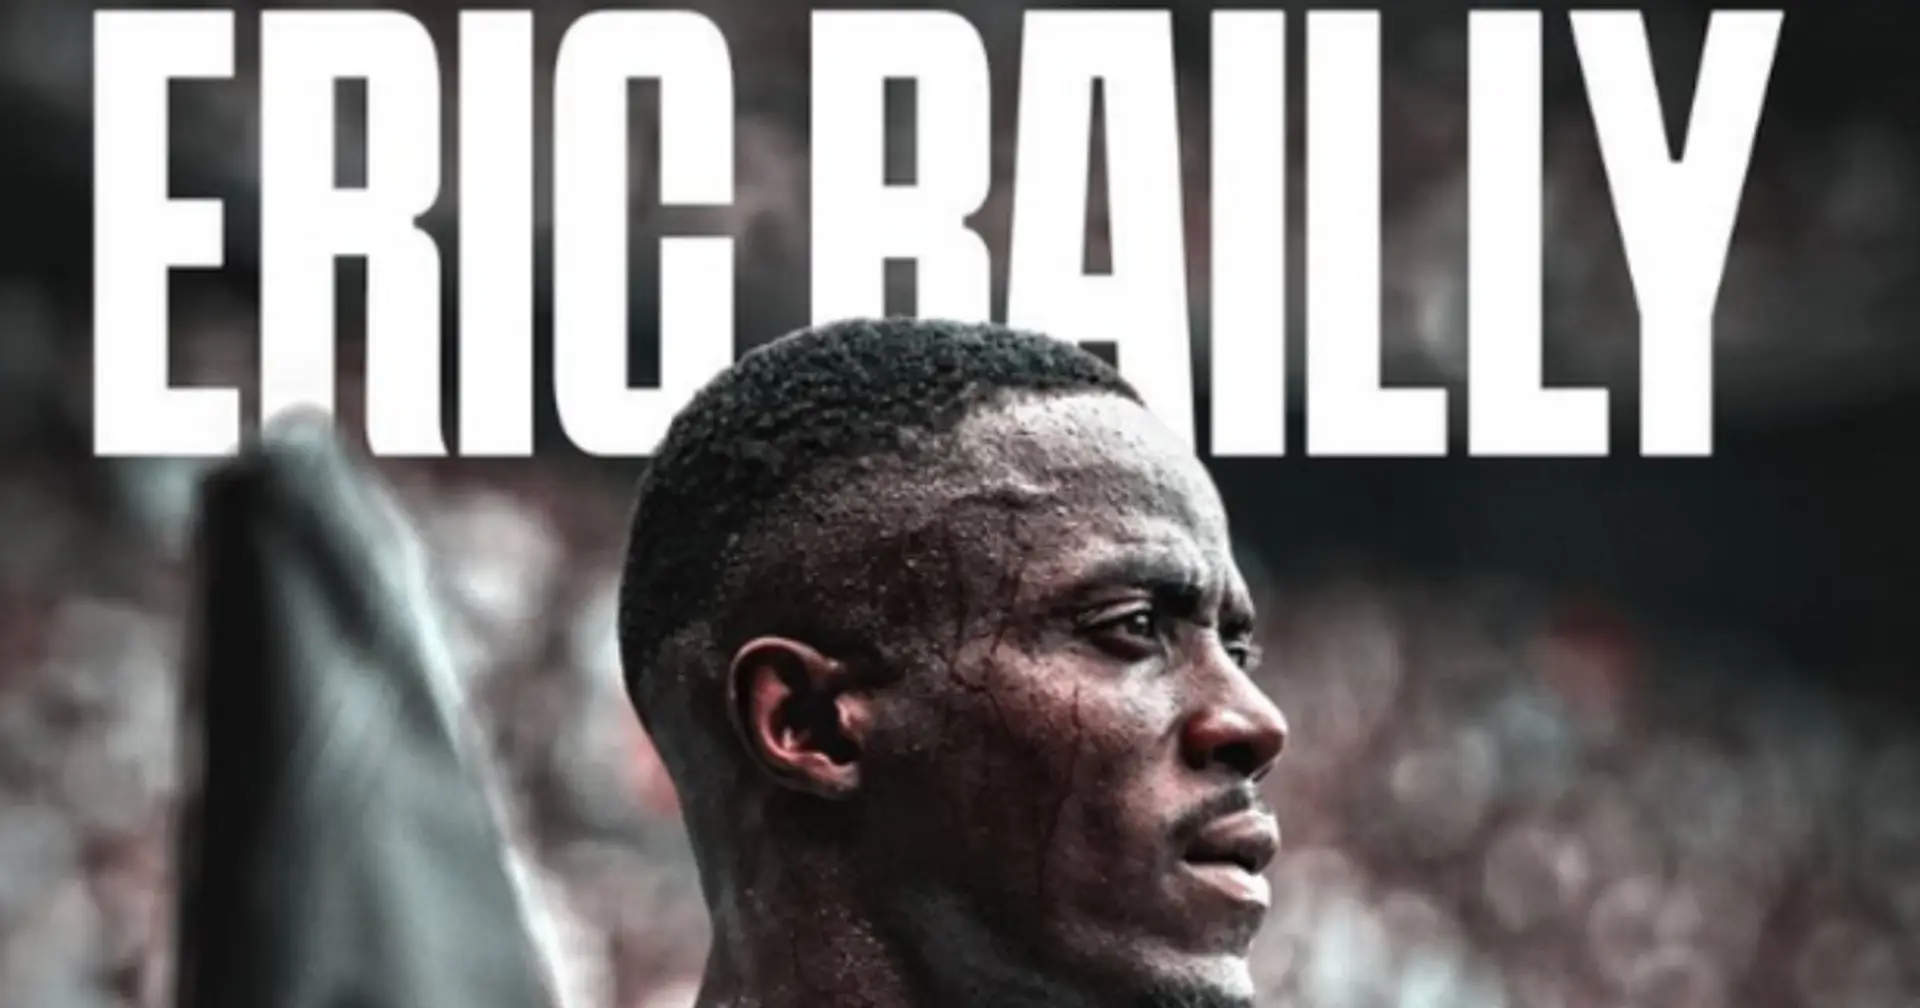 'Certainly one of a kind': Man United fans bid farewell to Eric Bailly